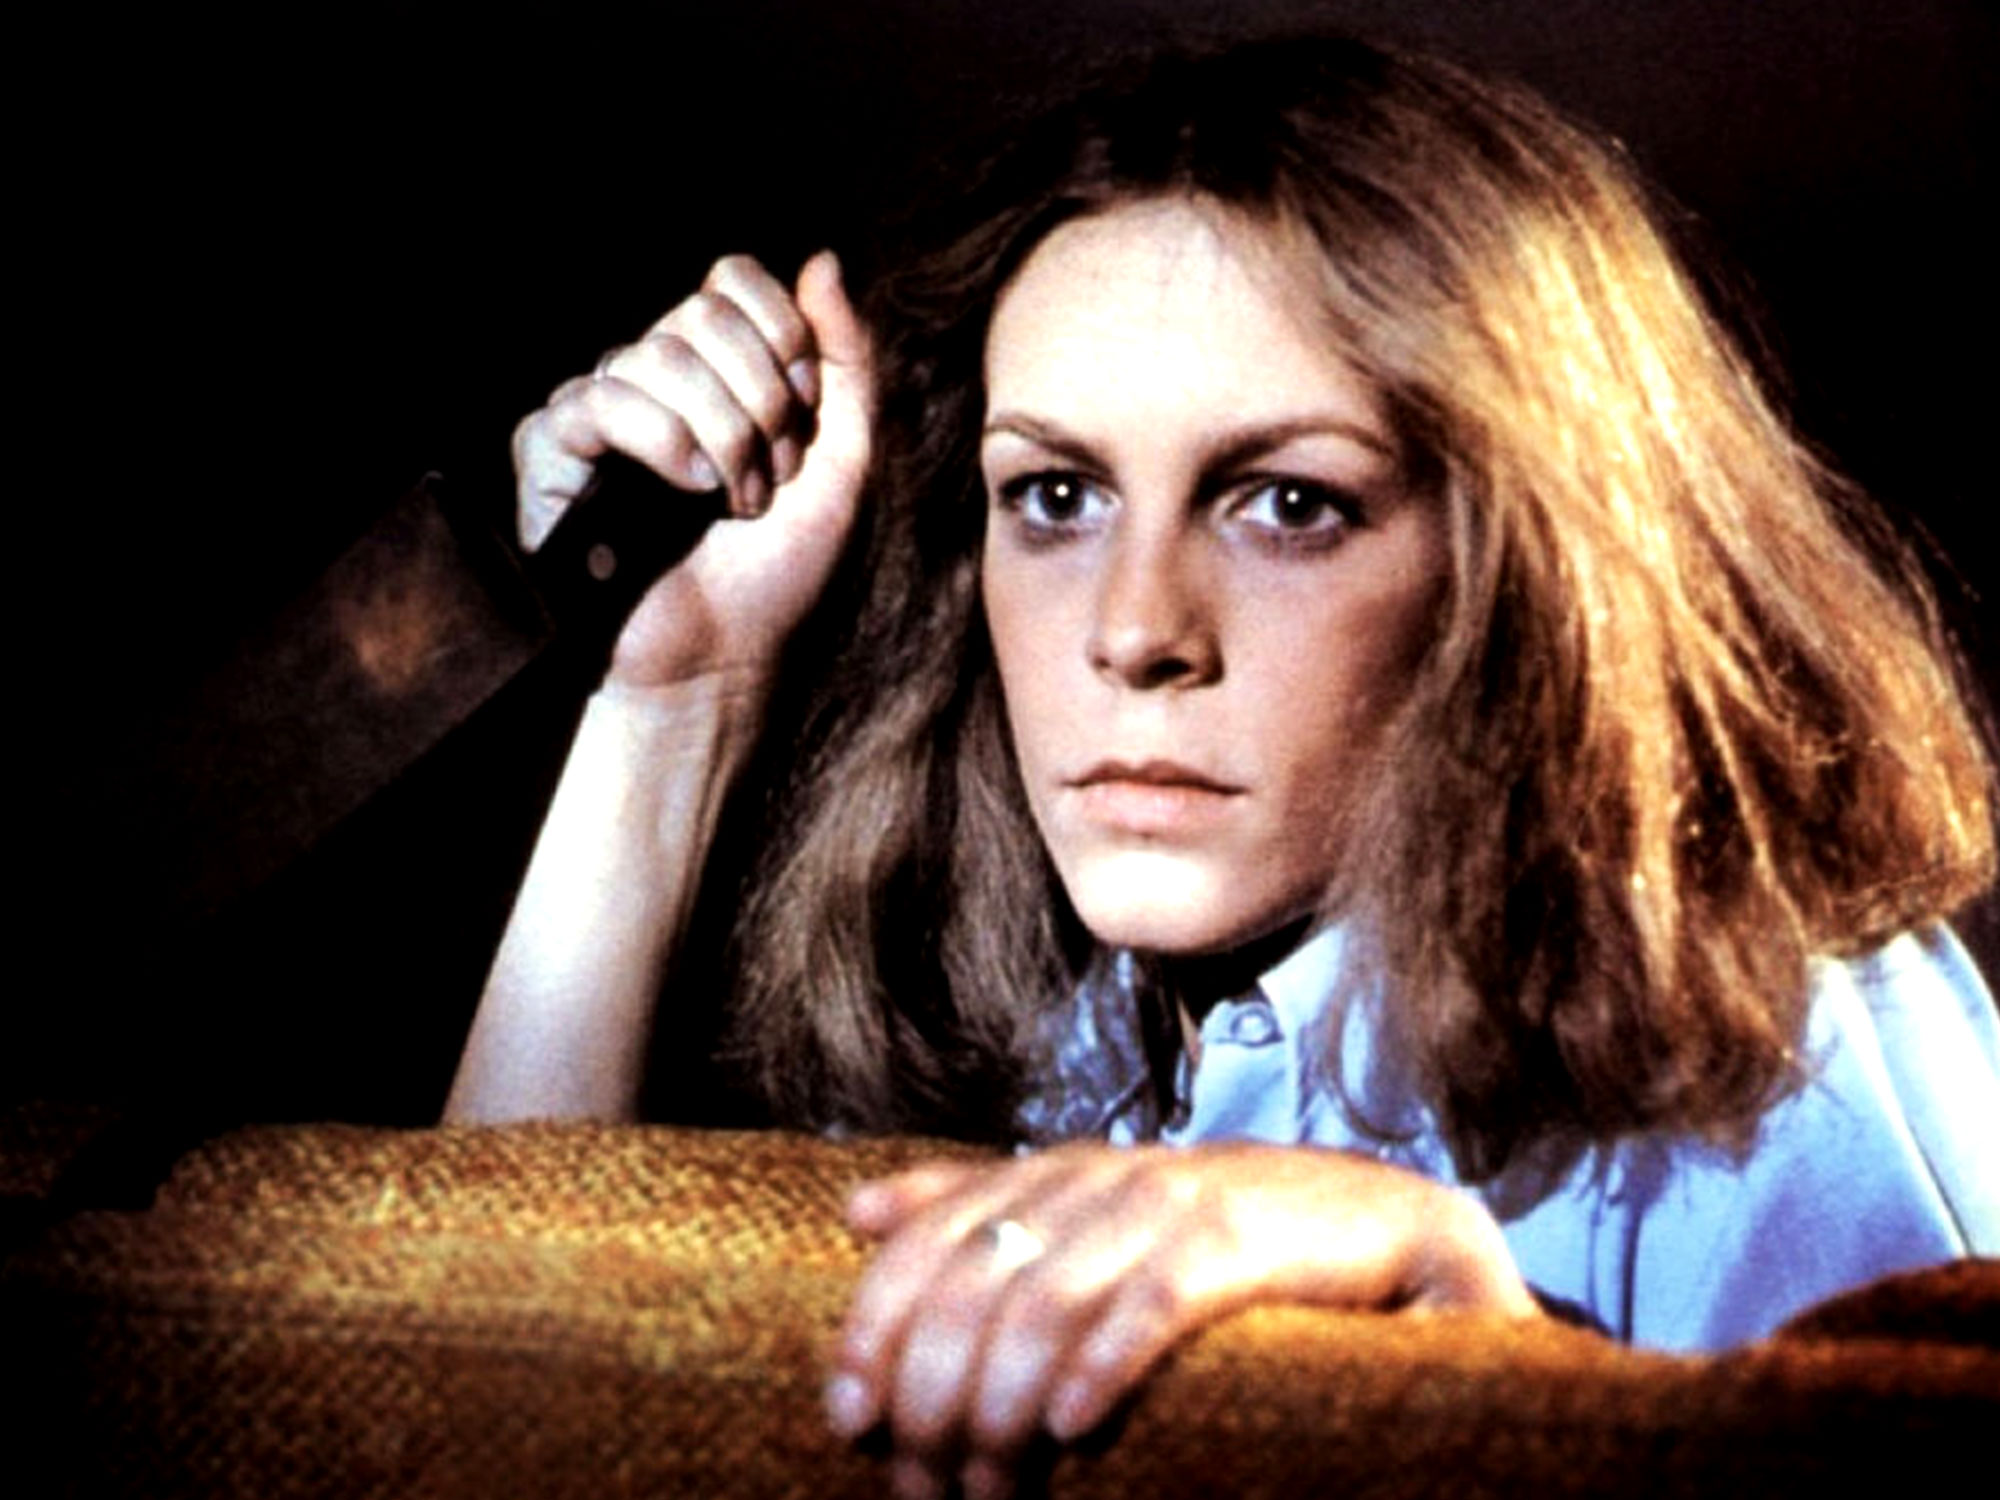 Exploring the monstrous desire between Michael Myers and Laurie Strode